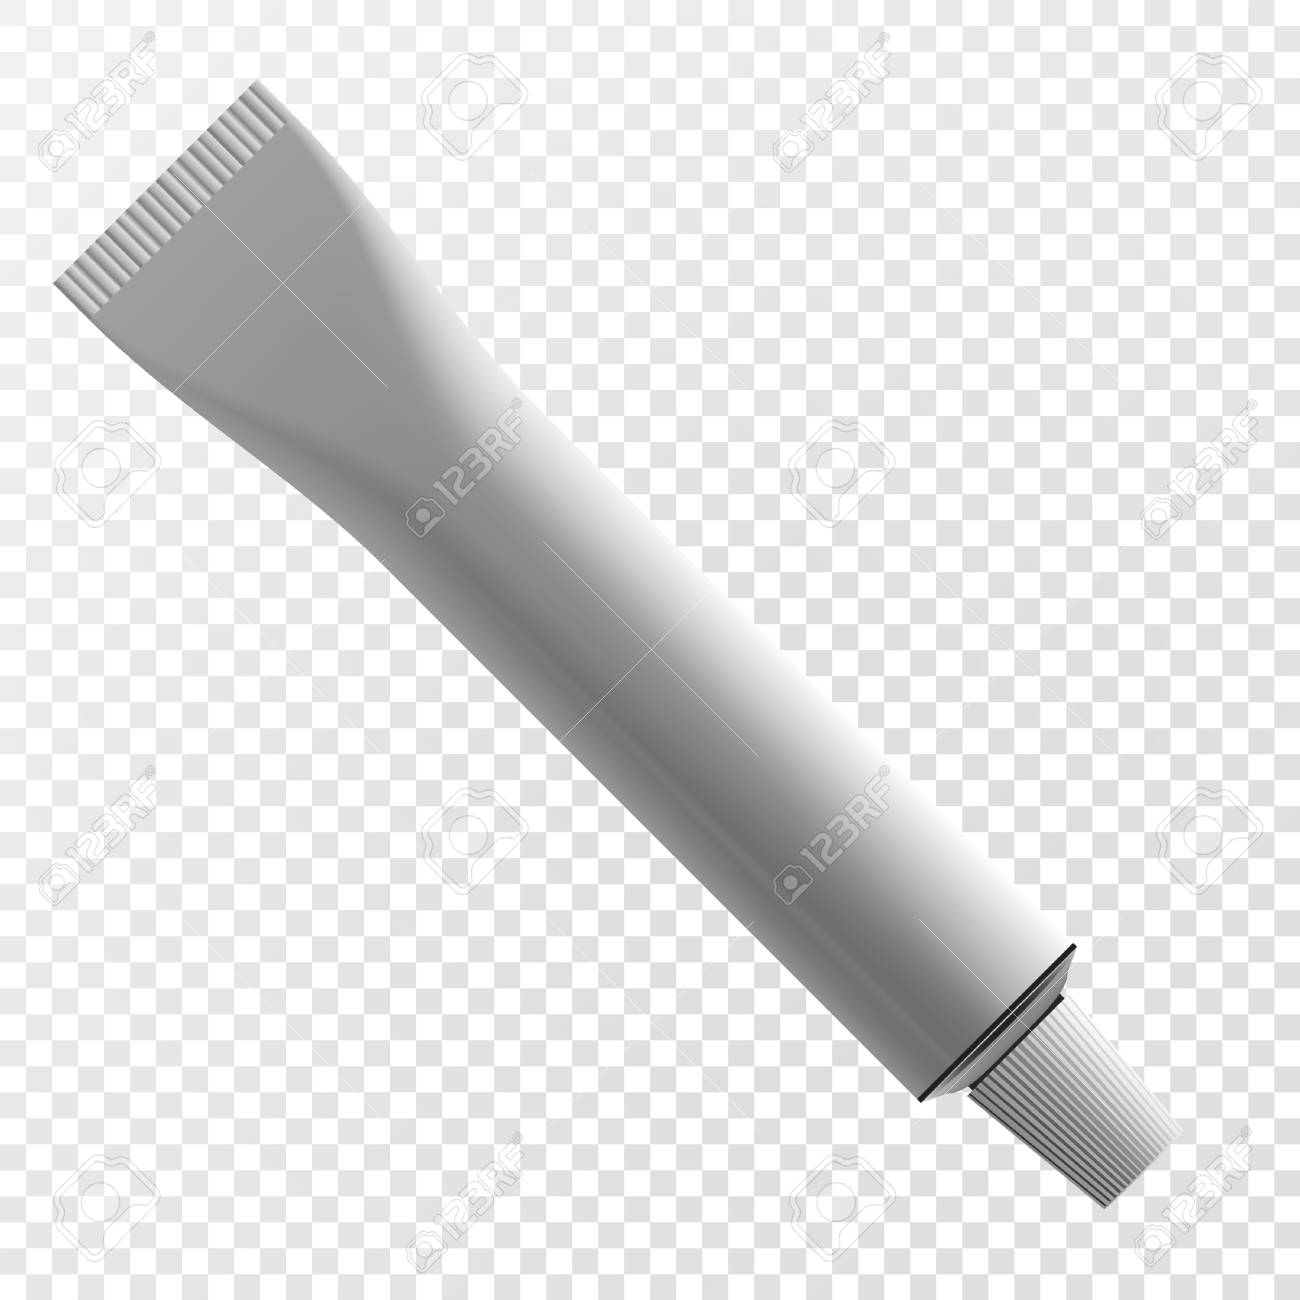 Realistic Tube Of Toothpaste Isolated On A Transparent Background